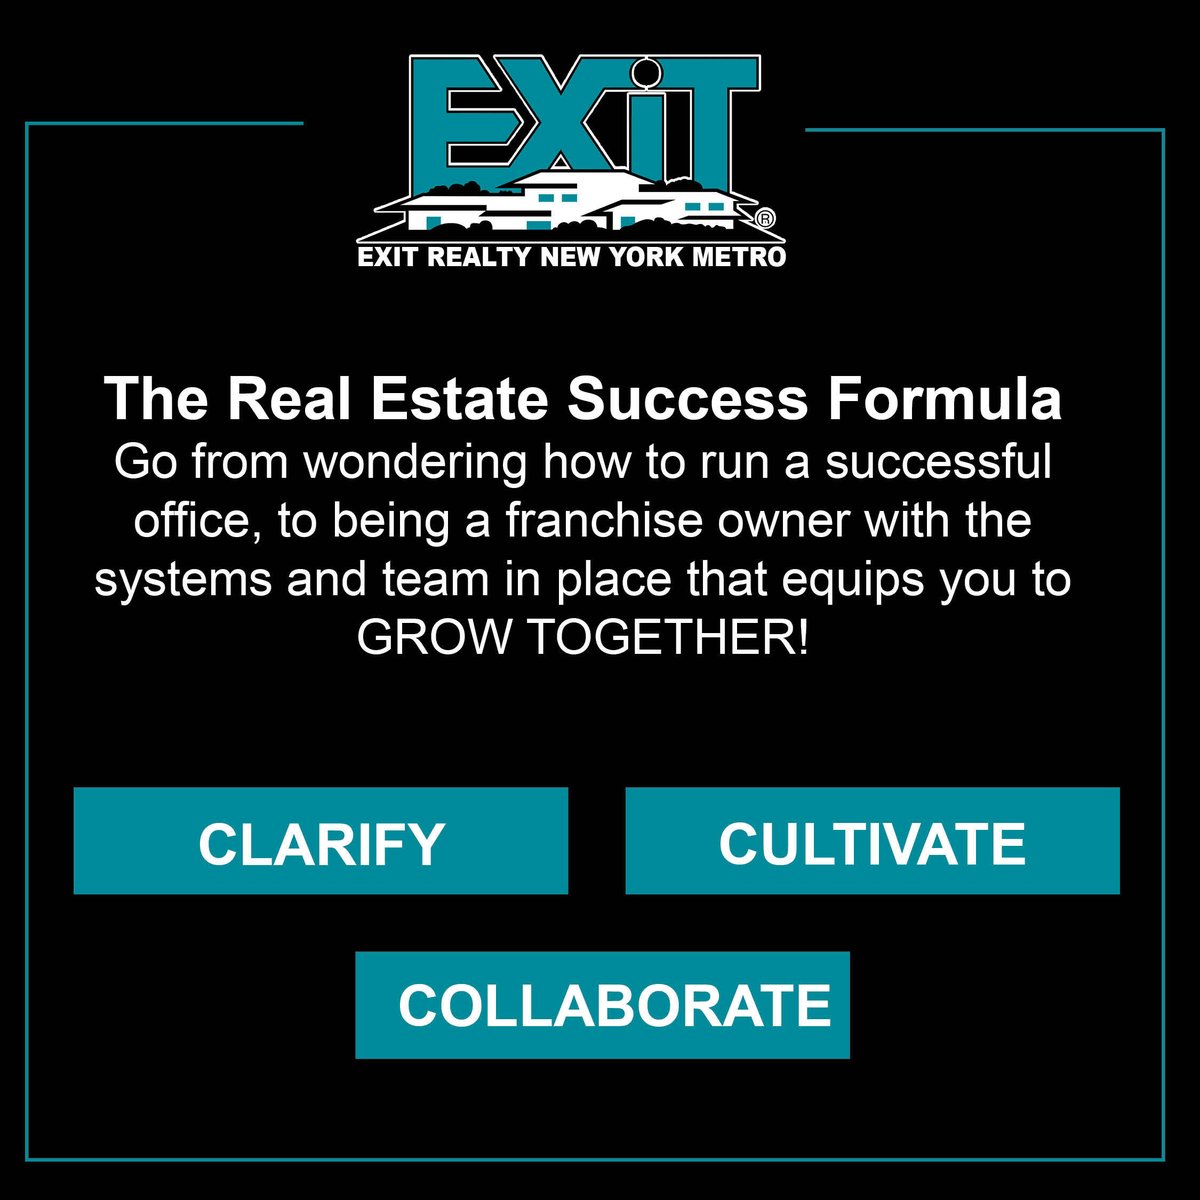 Visit JoinEXITRealty.com to learn more about the Real Estate Success Formula!
#realty #RealEstate #EXITRealty #NewYorkMetro #success #bestinclass #advertising #marketing #passiveincome #financialfreedom #realestatecareers #LovEXIT #JoinEXIT